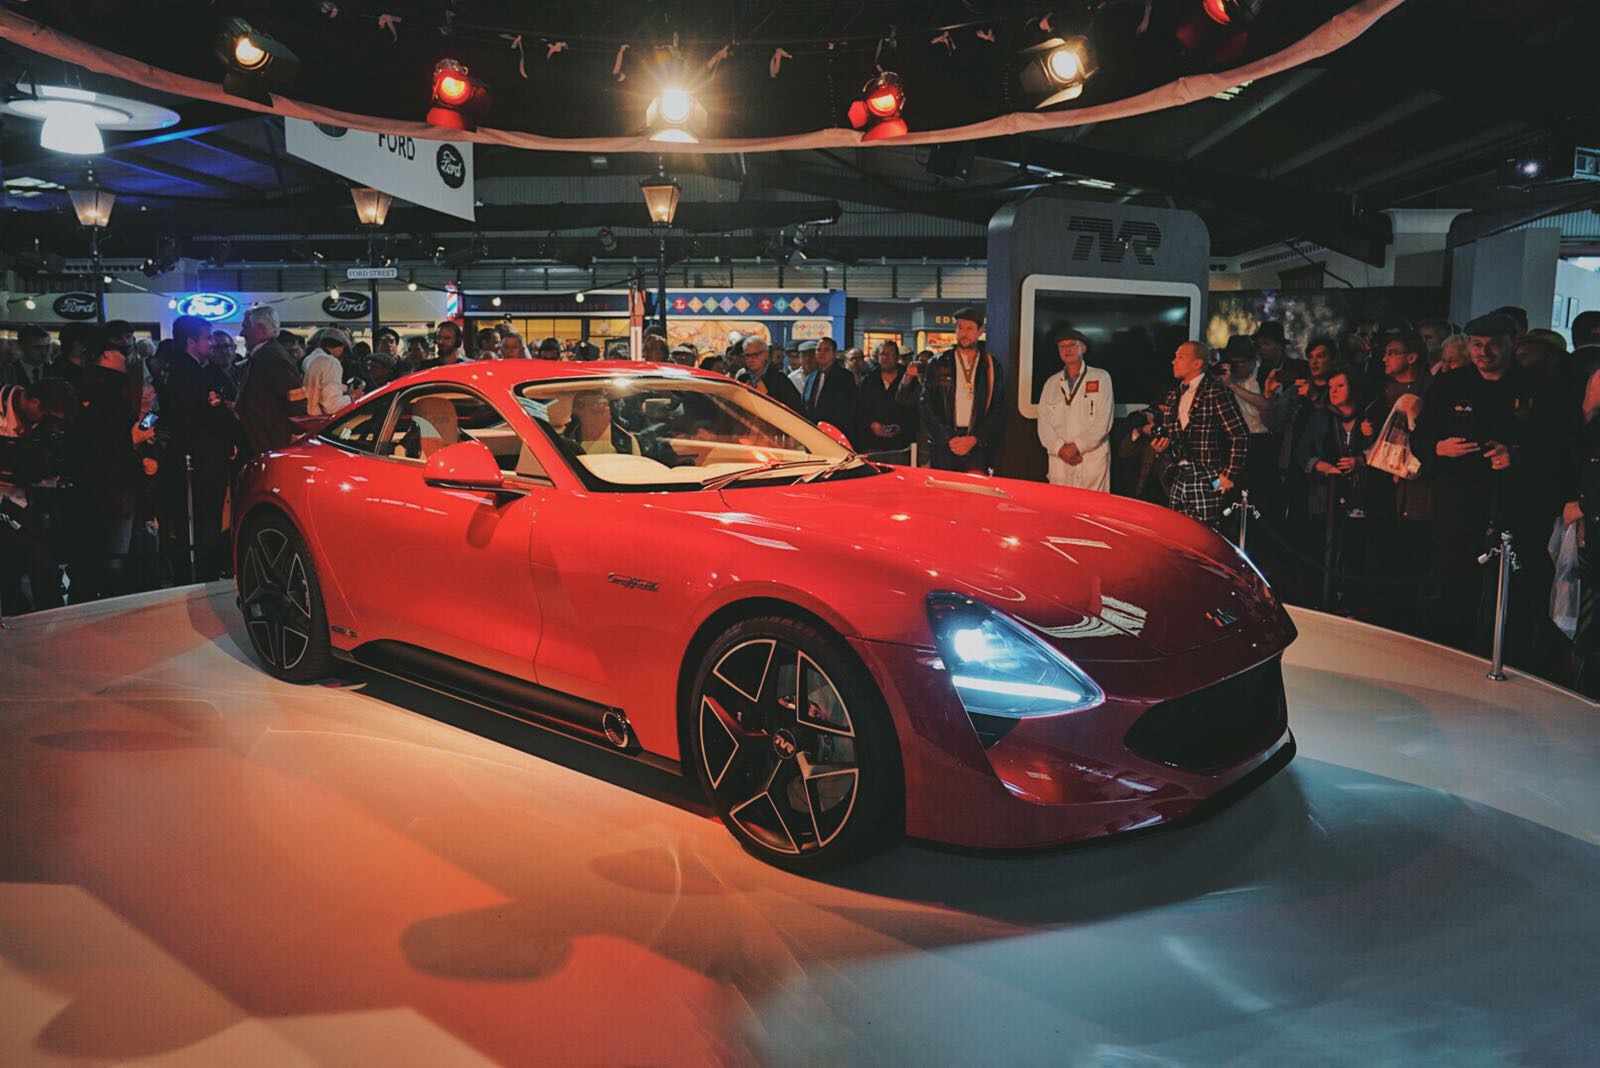 New TVR Griffith unveiled at Goodwood